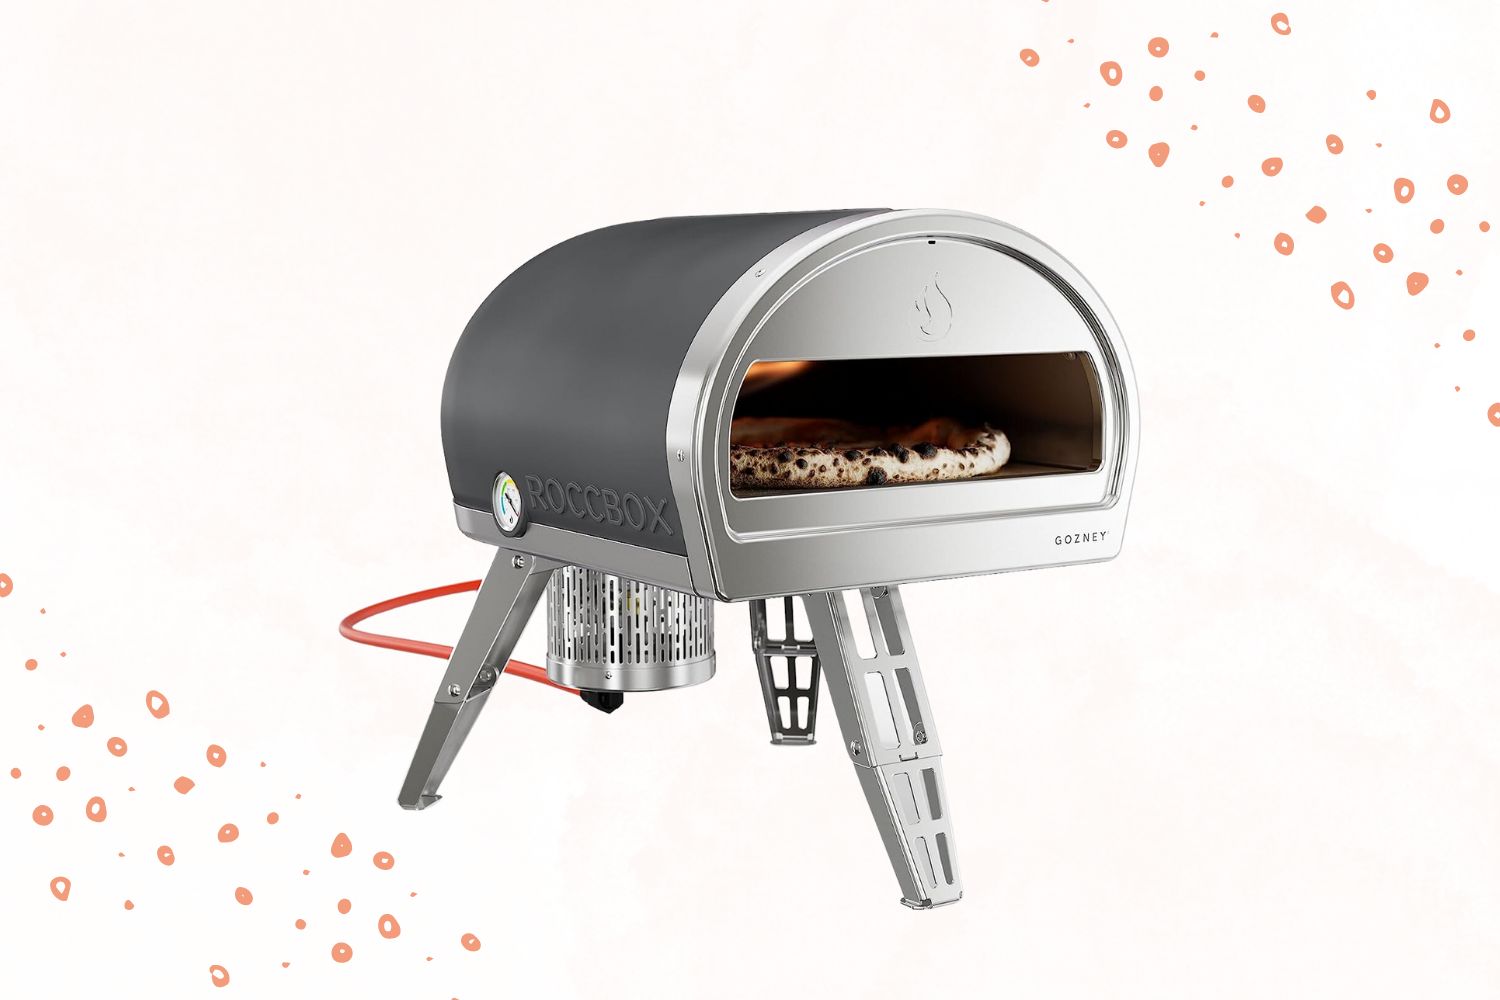 Roccbox Pizza Oven by Gozney 